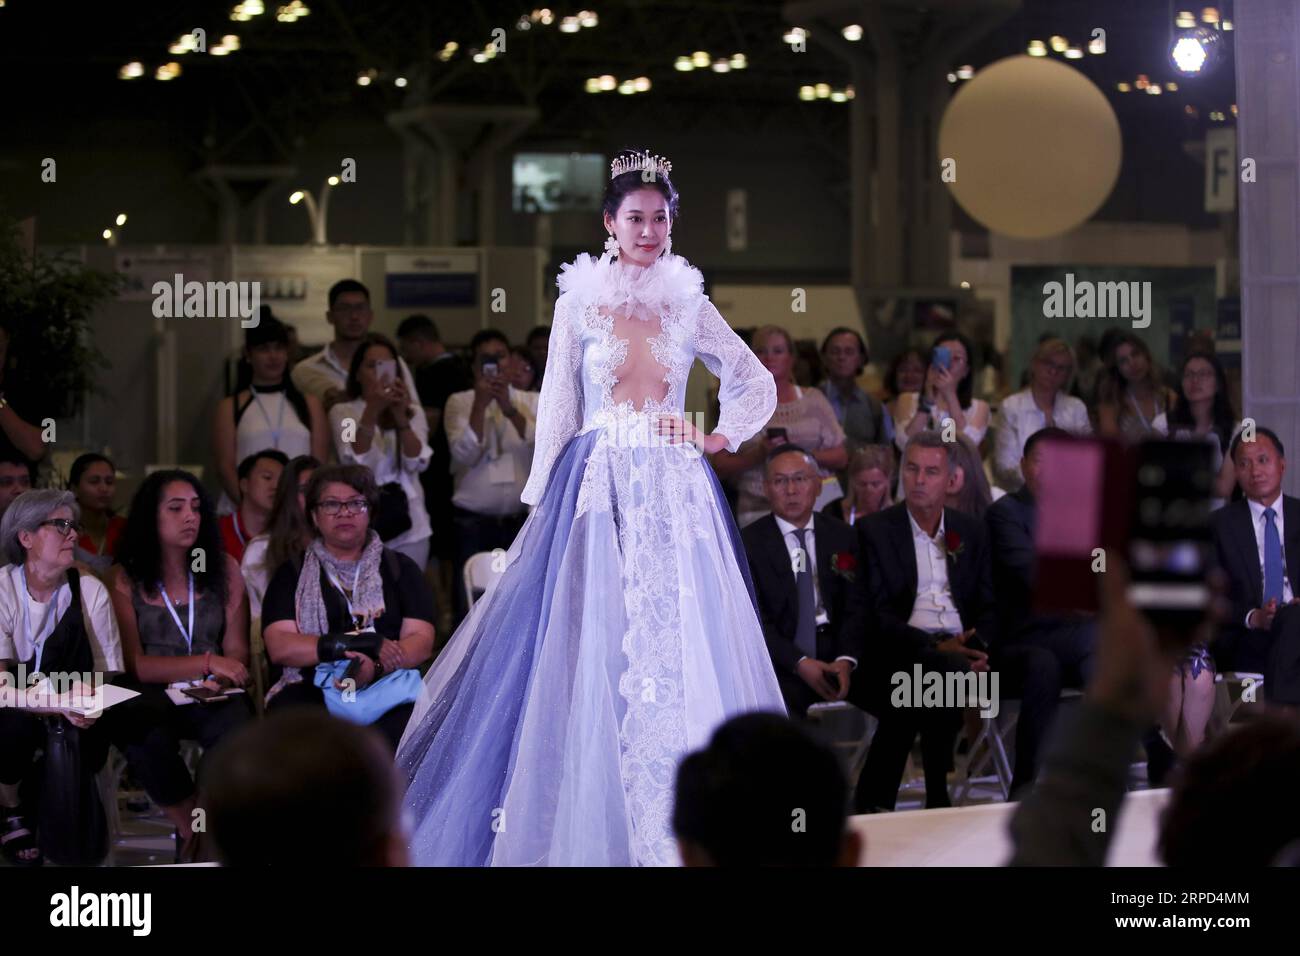 (190722) -- NEW YORK, July 22, 2019 -- A model presents a creation of a Chinese company during the 20th China Textile and Apparel Trade Show in New York, the United States, July 22, 2019. The 20th China Textile and Apparel Trade Show in New York opened on Monday in Manhattan s Javits Center, serving as a platform to showcase the latest industrial trends and help Chinese companies explore the U.S. market. Over 500 Chinese garment, fabric and textile companies are attending this year s trade show, which will run through Wednesday. Another 300 or so companies from 16 countries and regions also jo Stock Photo